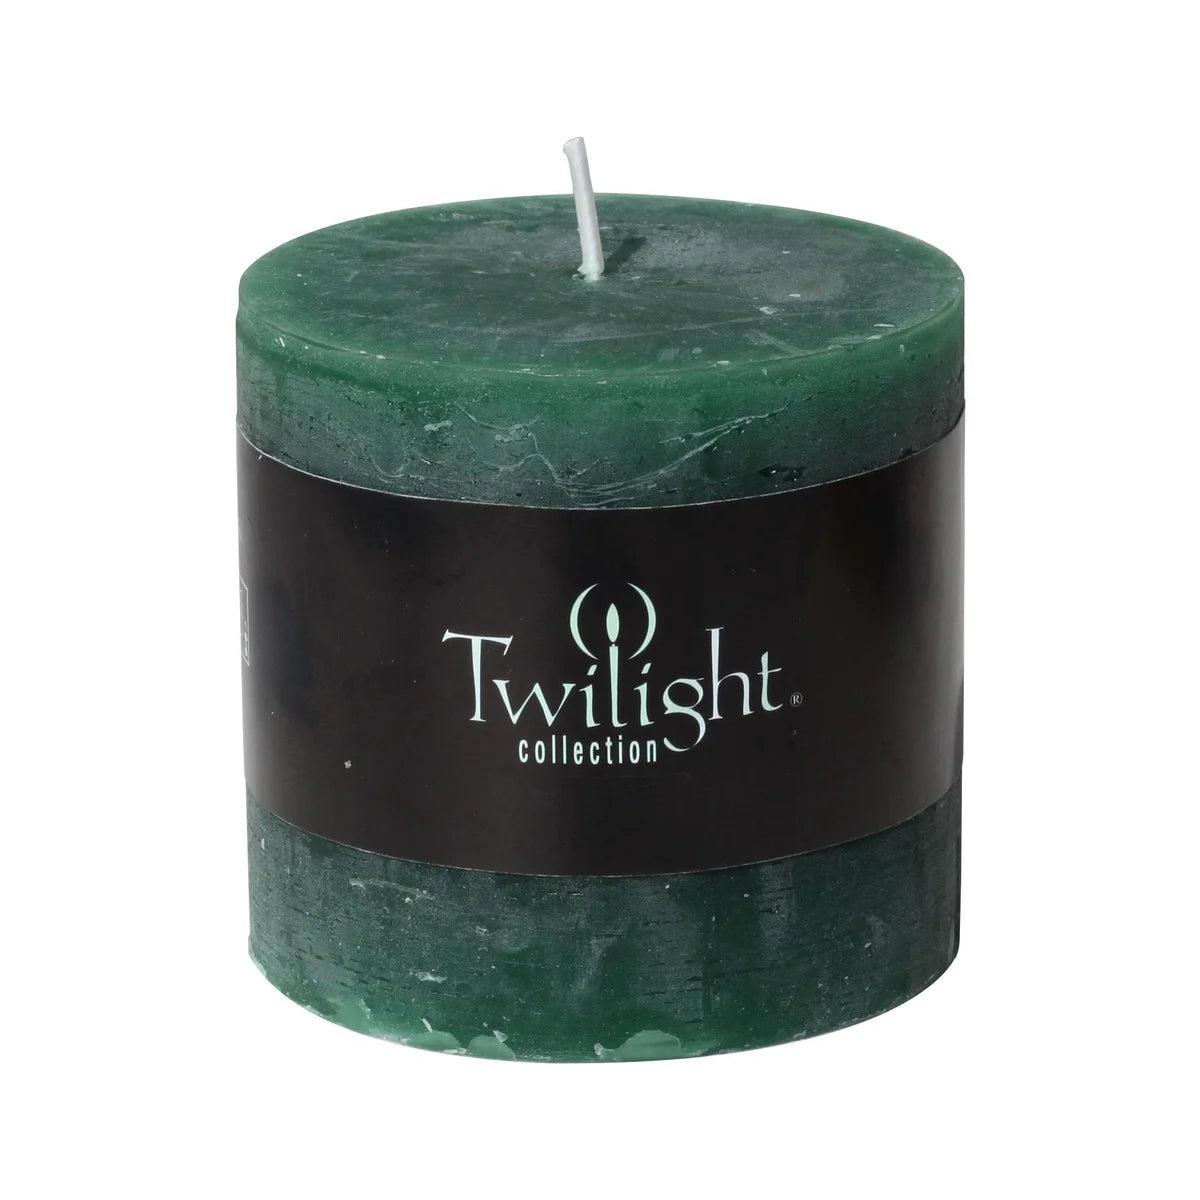 Twilight Rustic Pillars Candles /Square Chunky Pillar/Scented